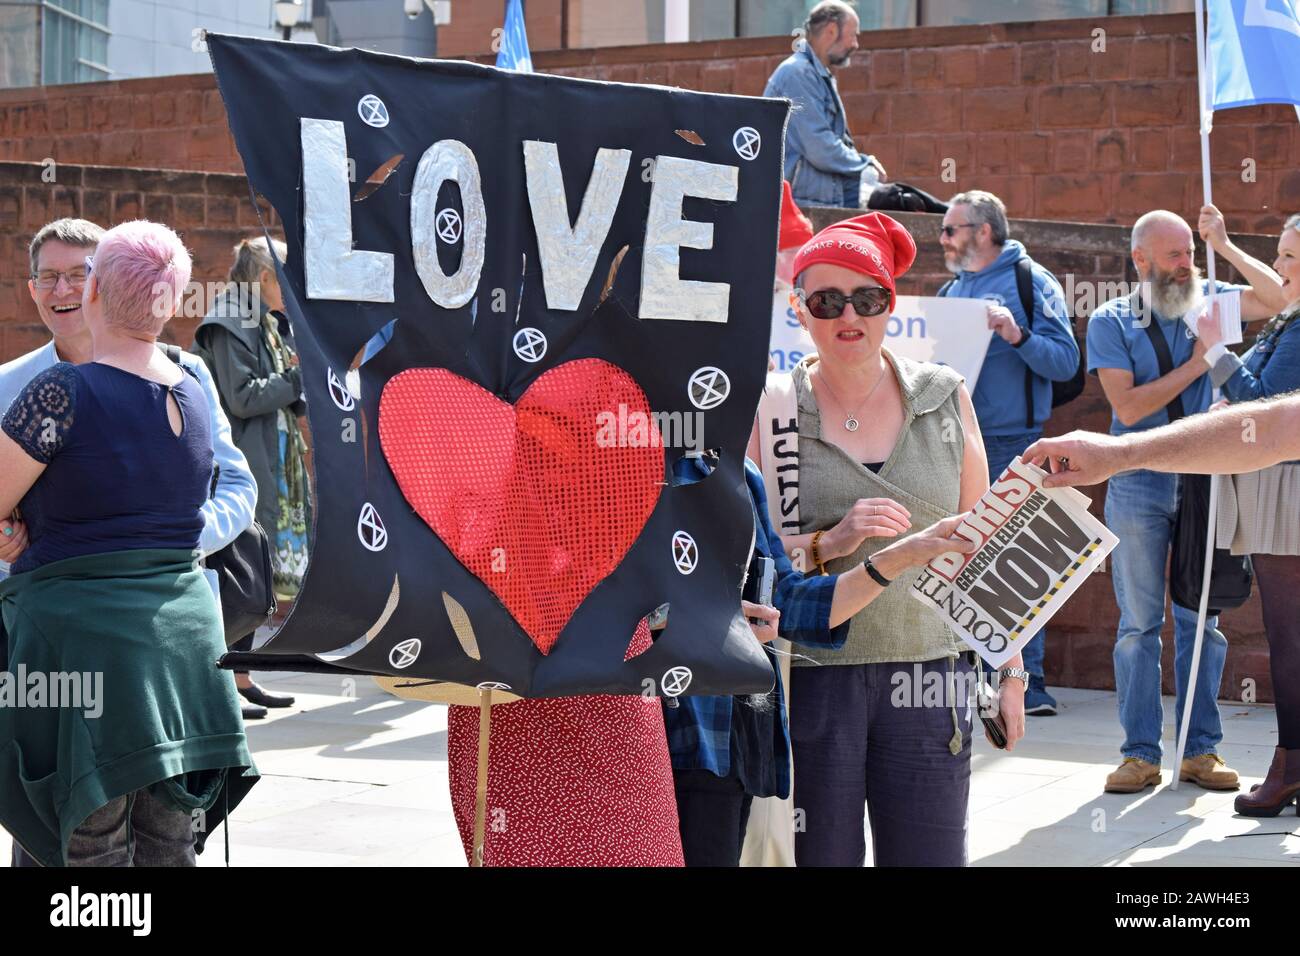 Reboot democracy rally on 200th anniversary of Peterloo massacre at St Peter's Square Manchester. Woman holding banner with love and heart. Stock Photo